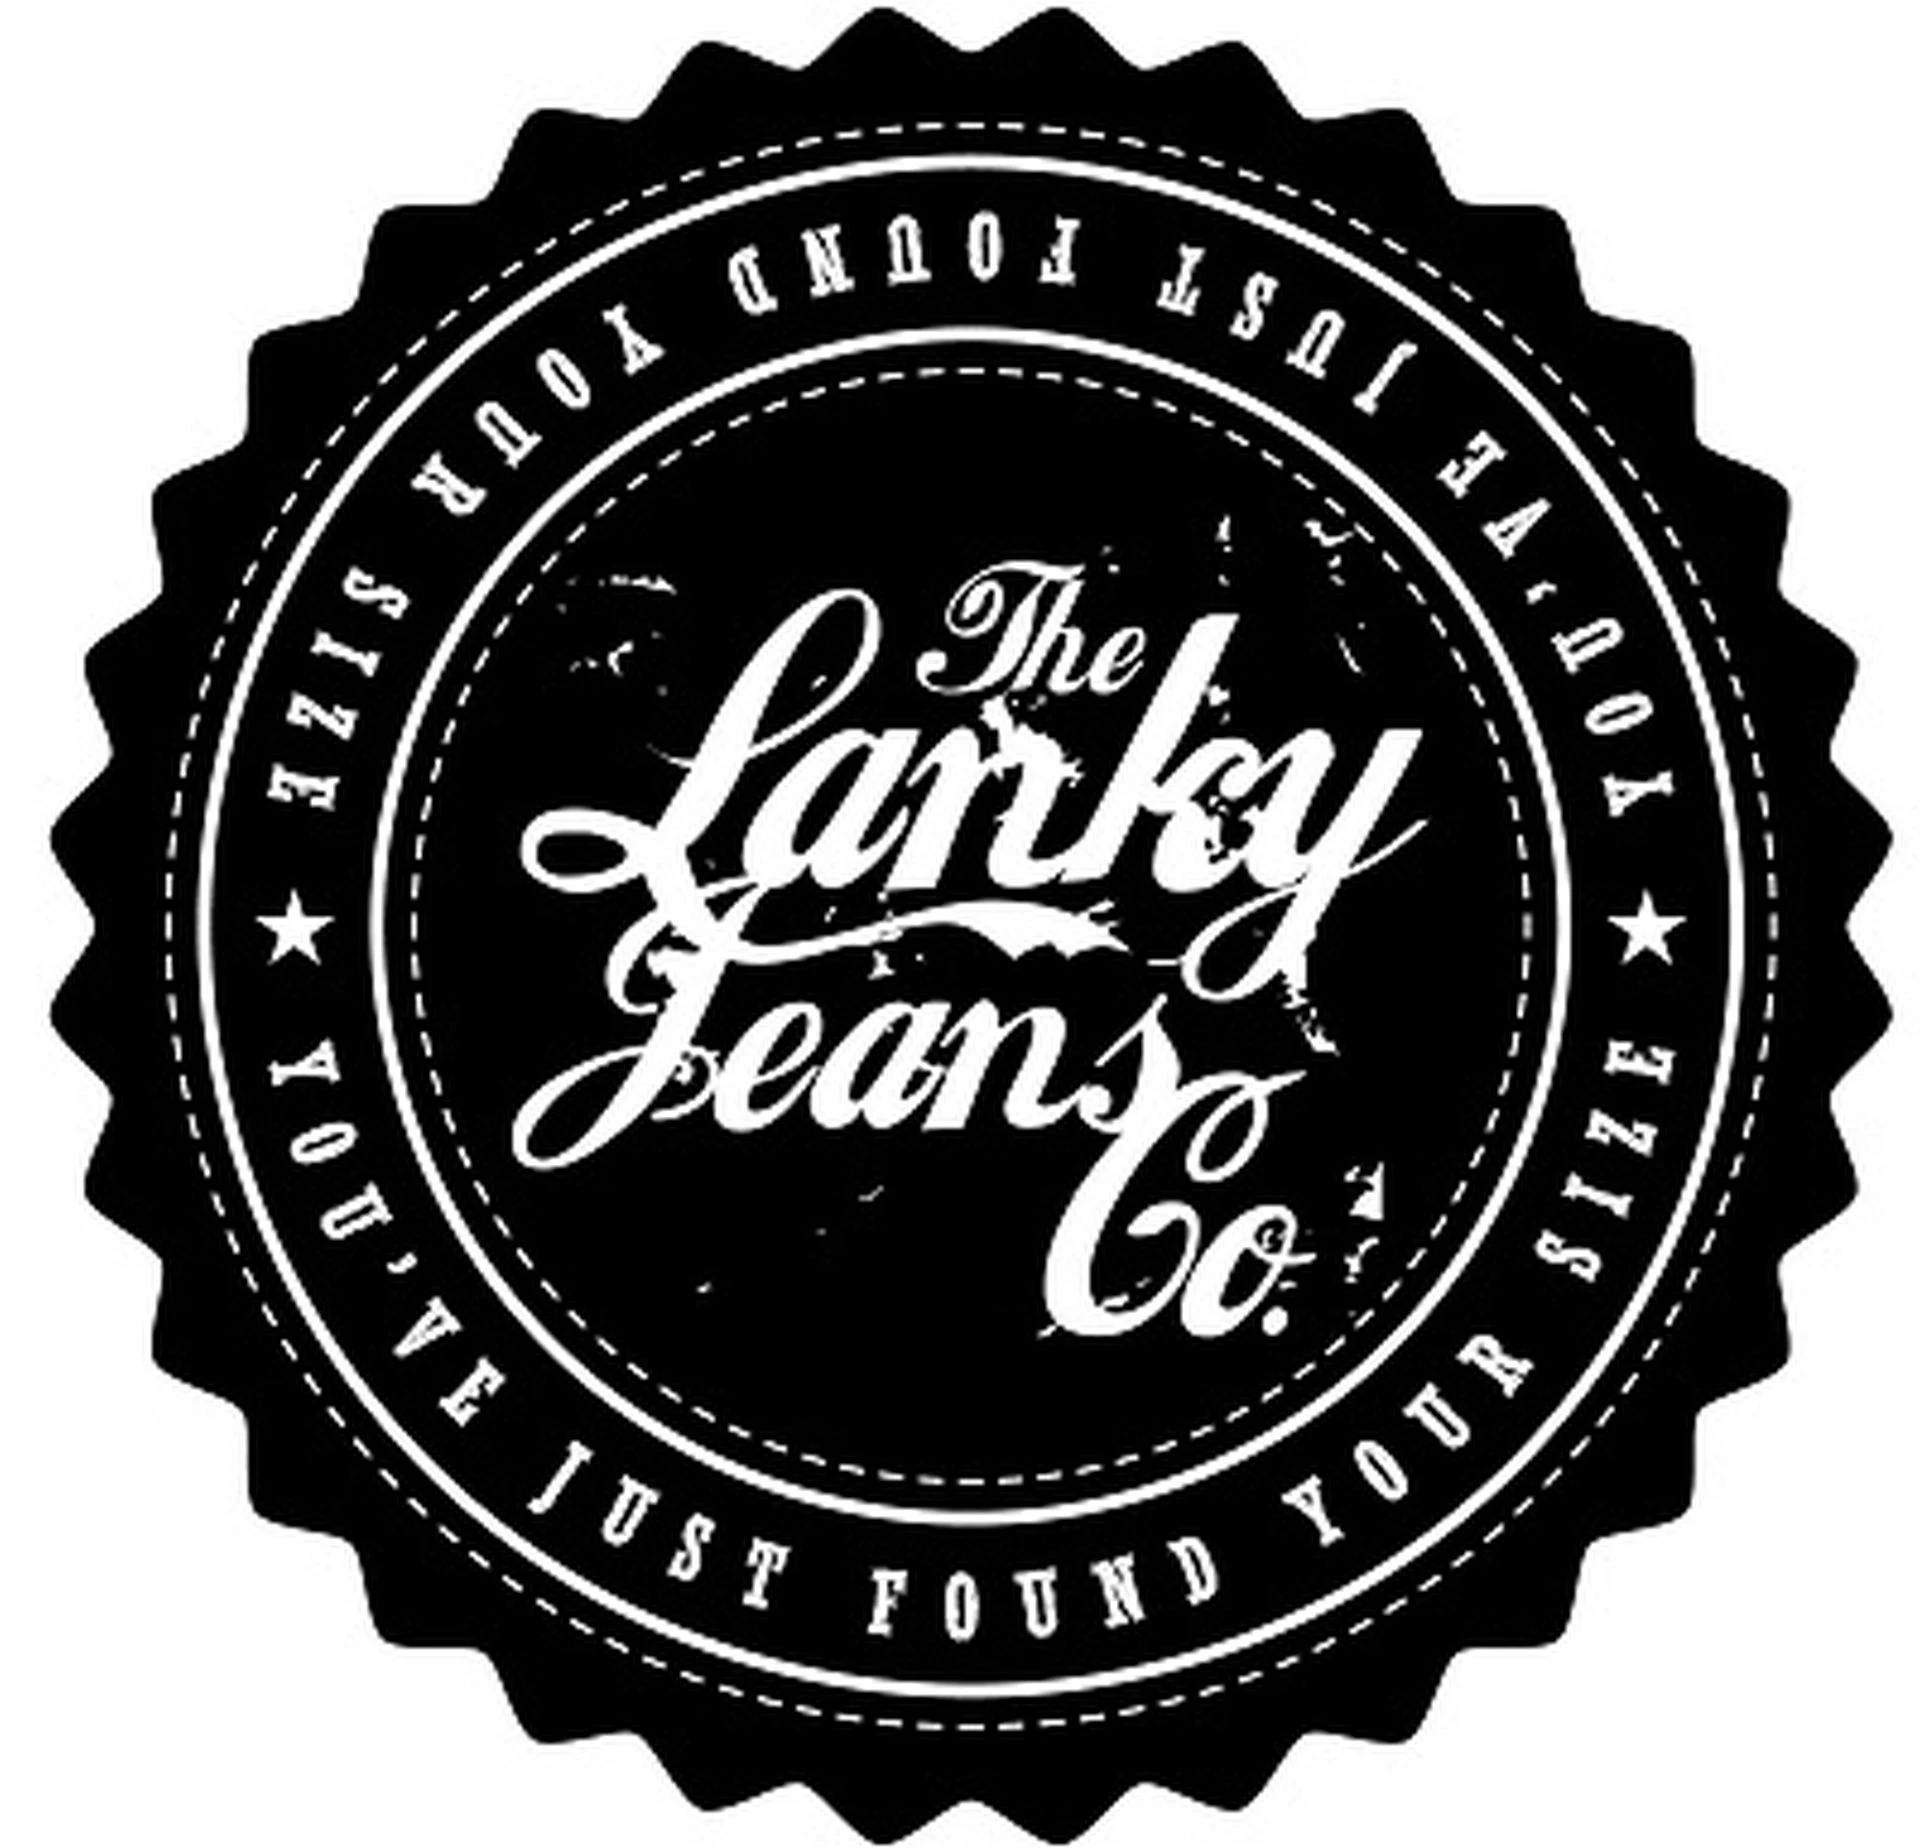 The Lanky Jeans Co